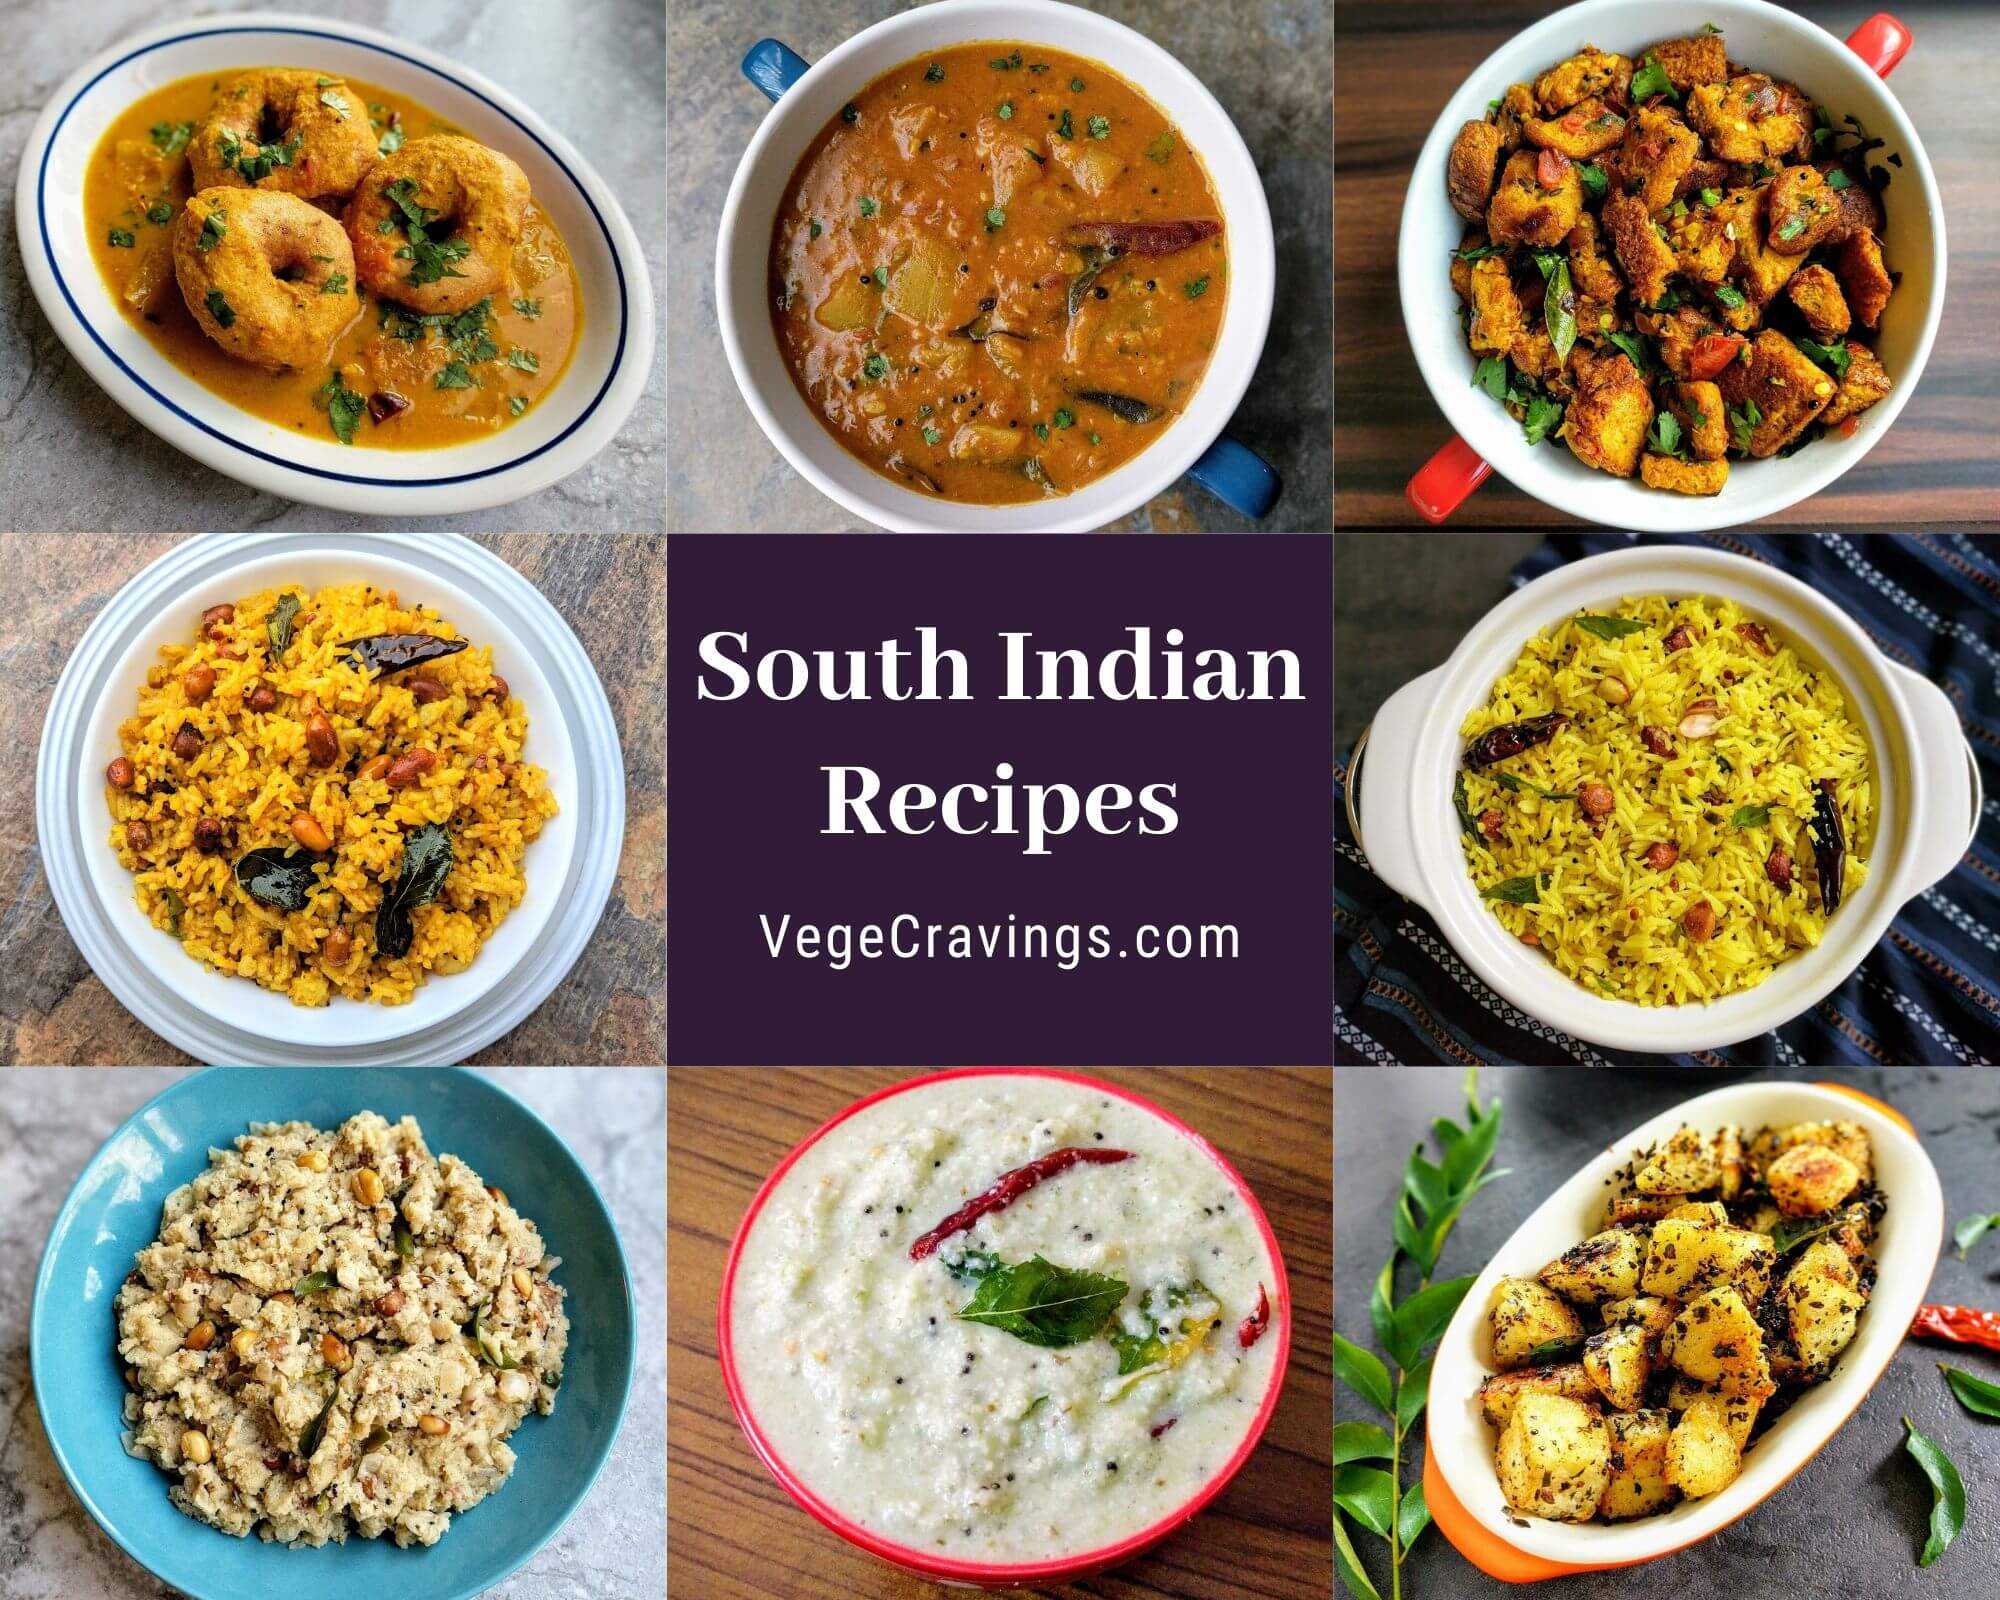 South Indian Recipes generally refer to a myriad of dishes cooked in the Southern states of India like Dosas, Idlis, Uttapams, Upmas, Sambar, Chutneys, Rasam etc. South Indian food strikes a good balance of simplicity, nutrition & flavor. See our collection of delicious South Indian recipes.